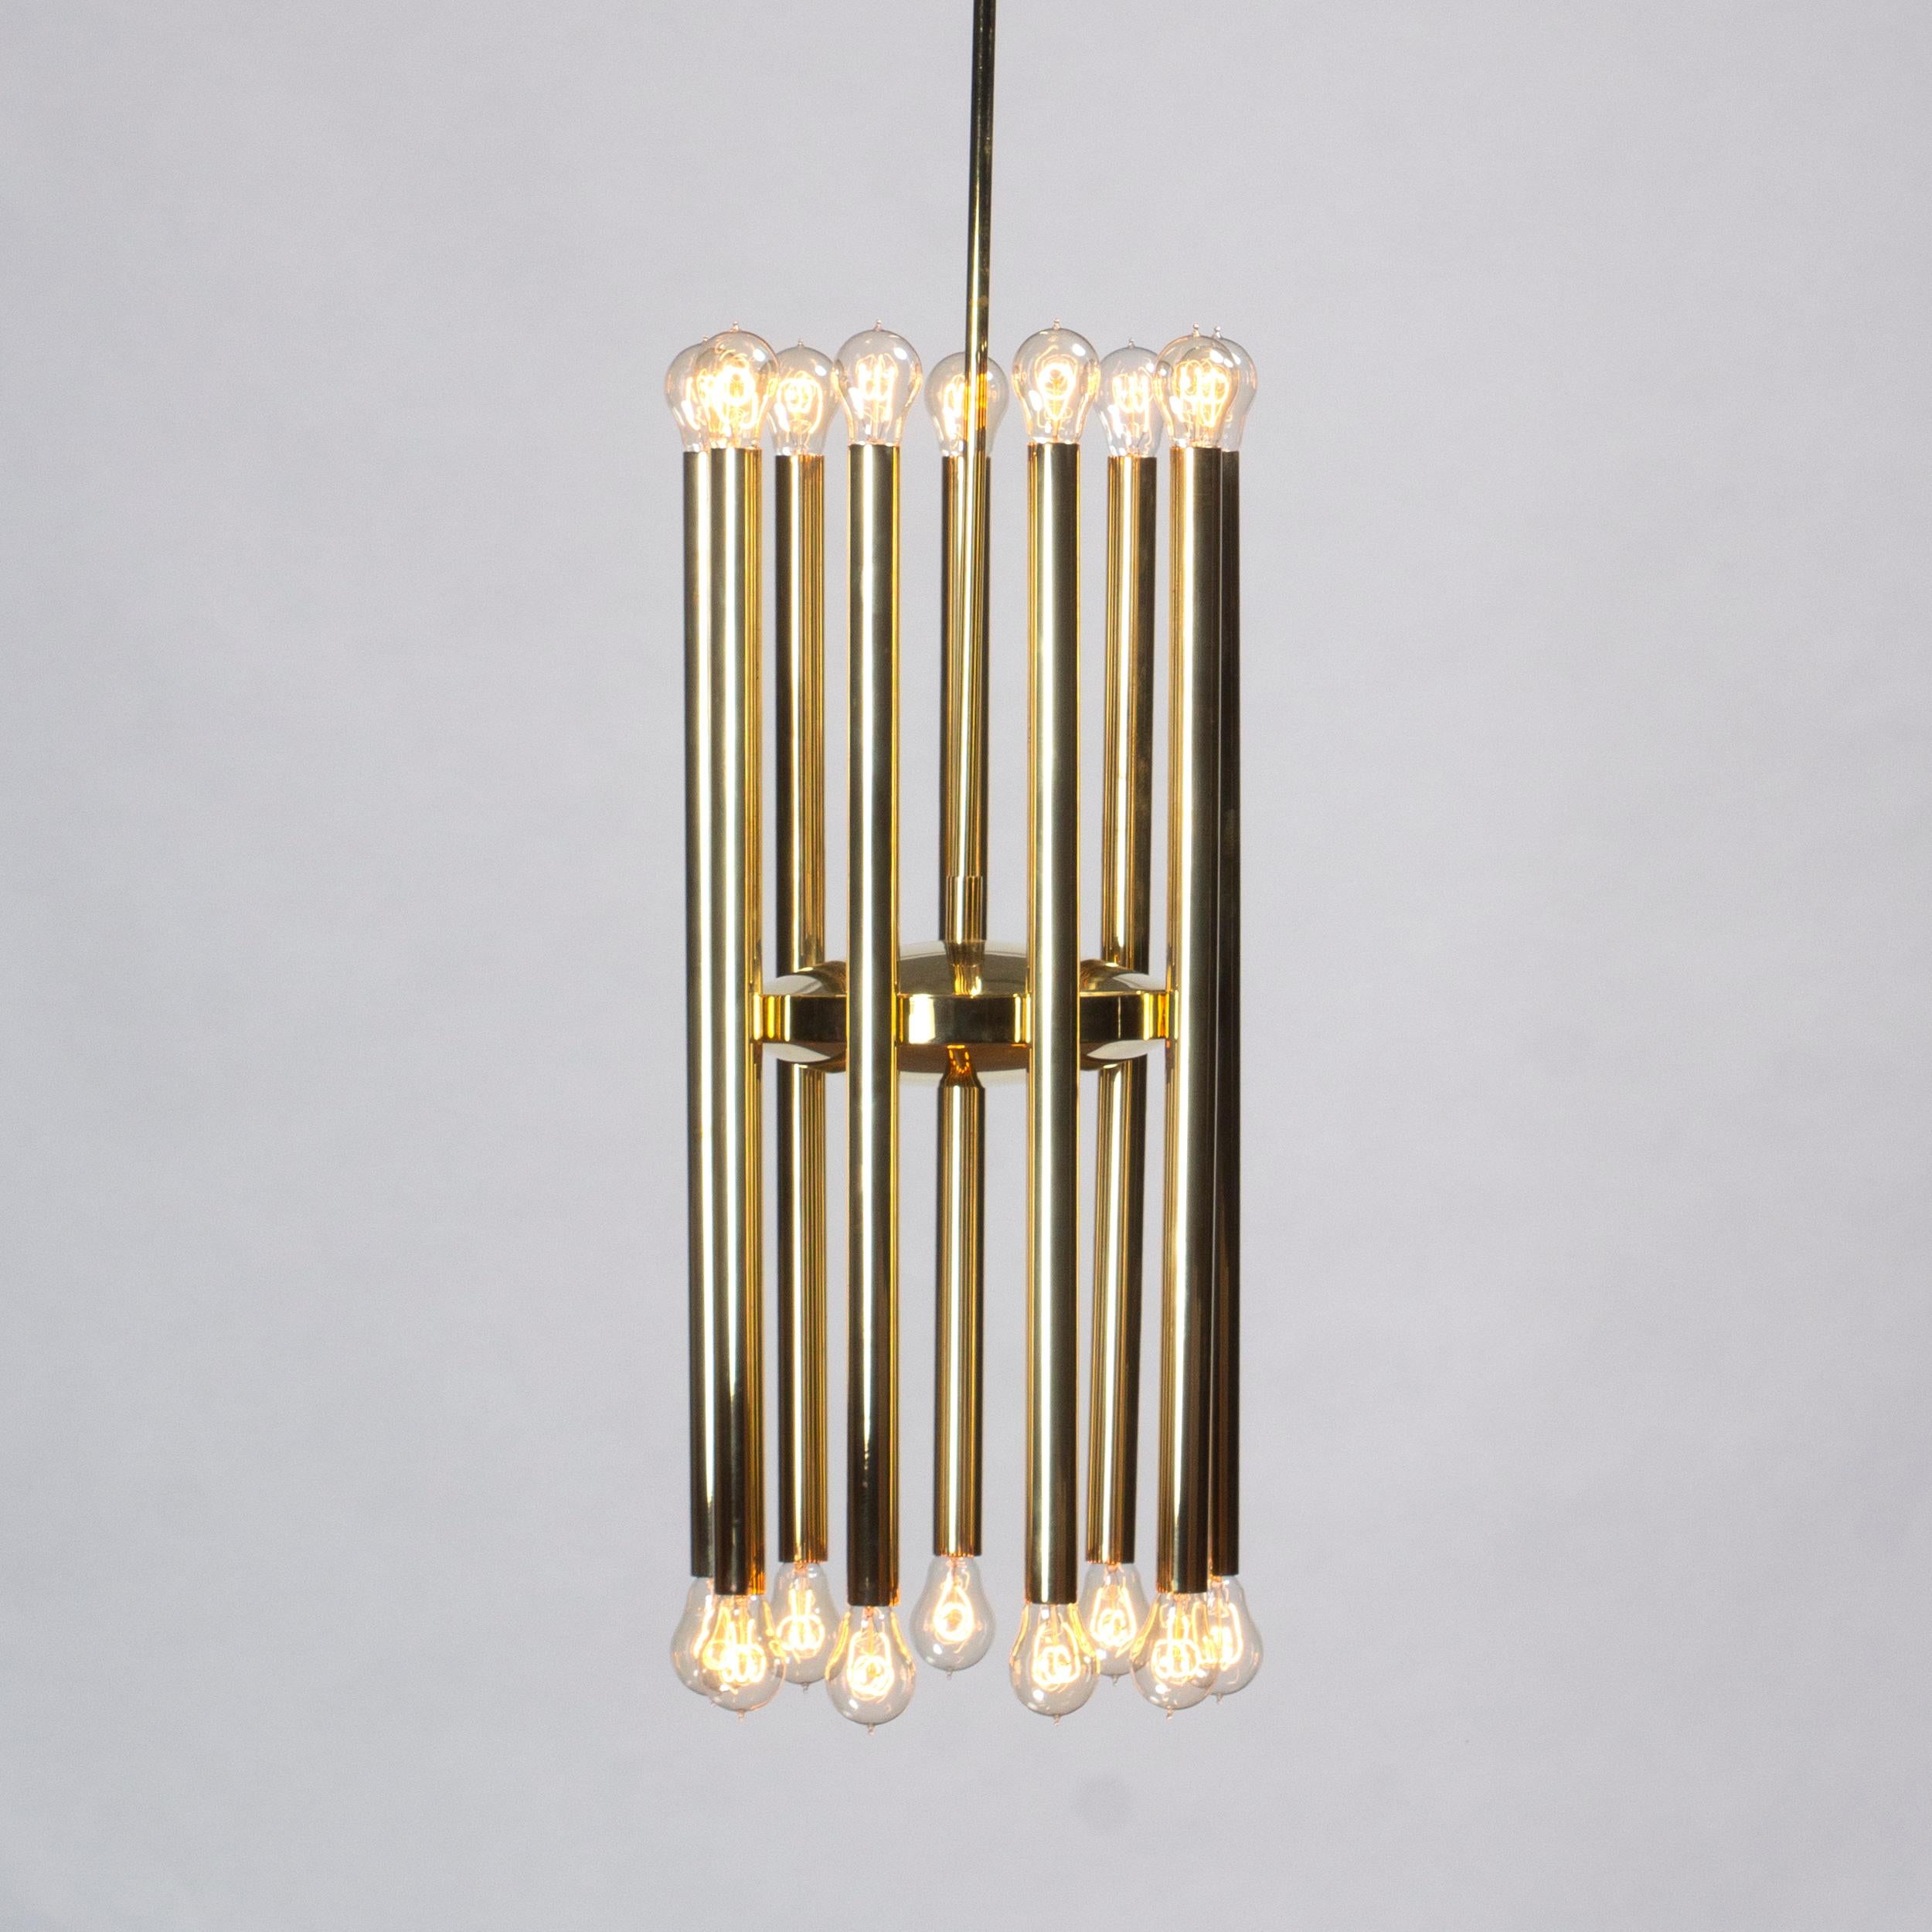 A dramatic brass ceiling fixture with nine adjustable tubes encircling a brass disc.  